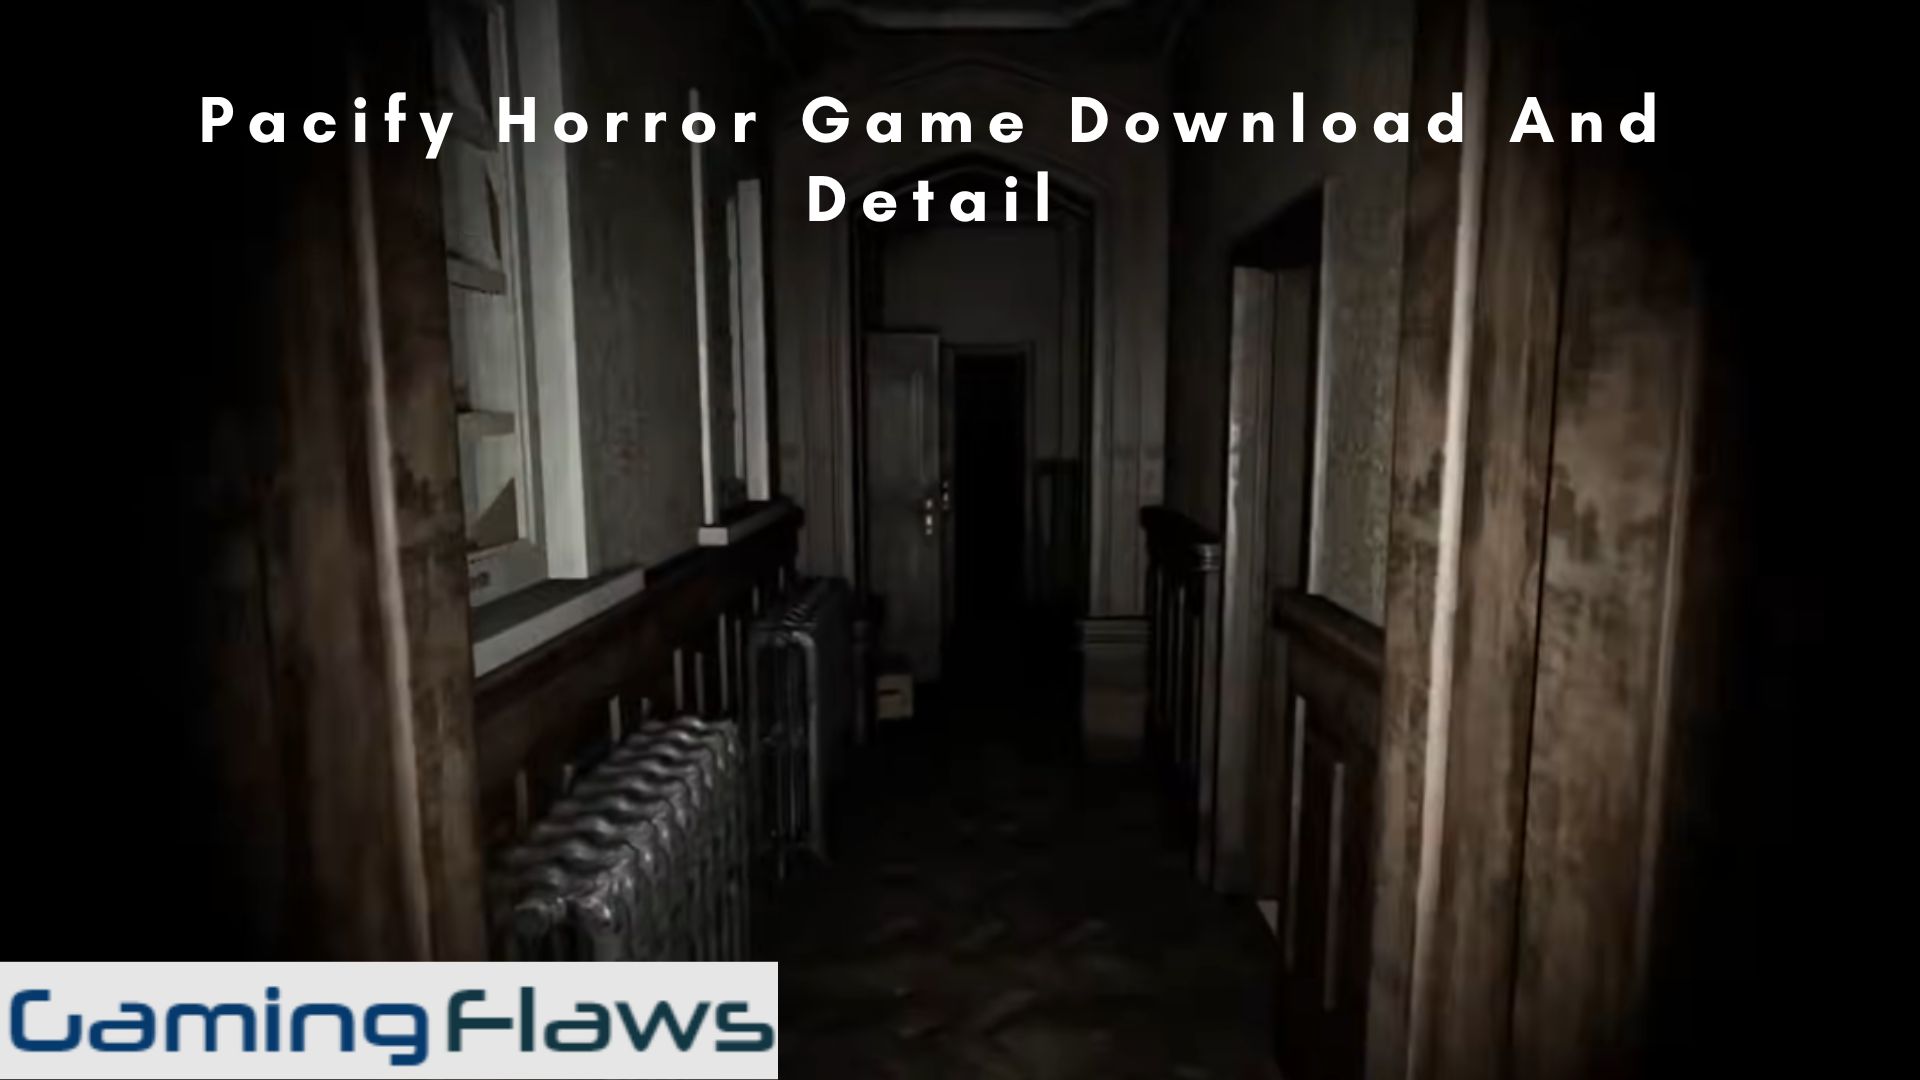 Pacify Horror Game Download And Detail